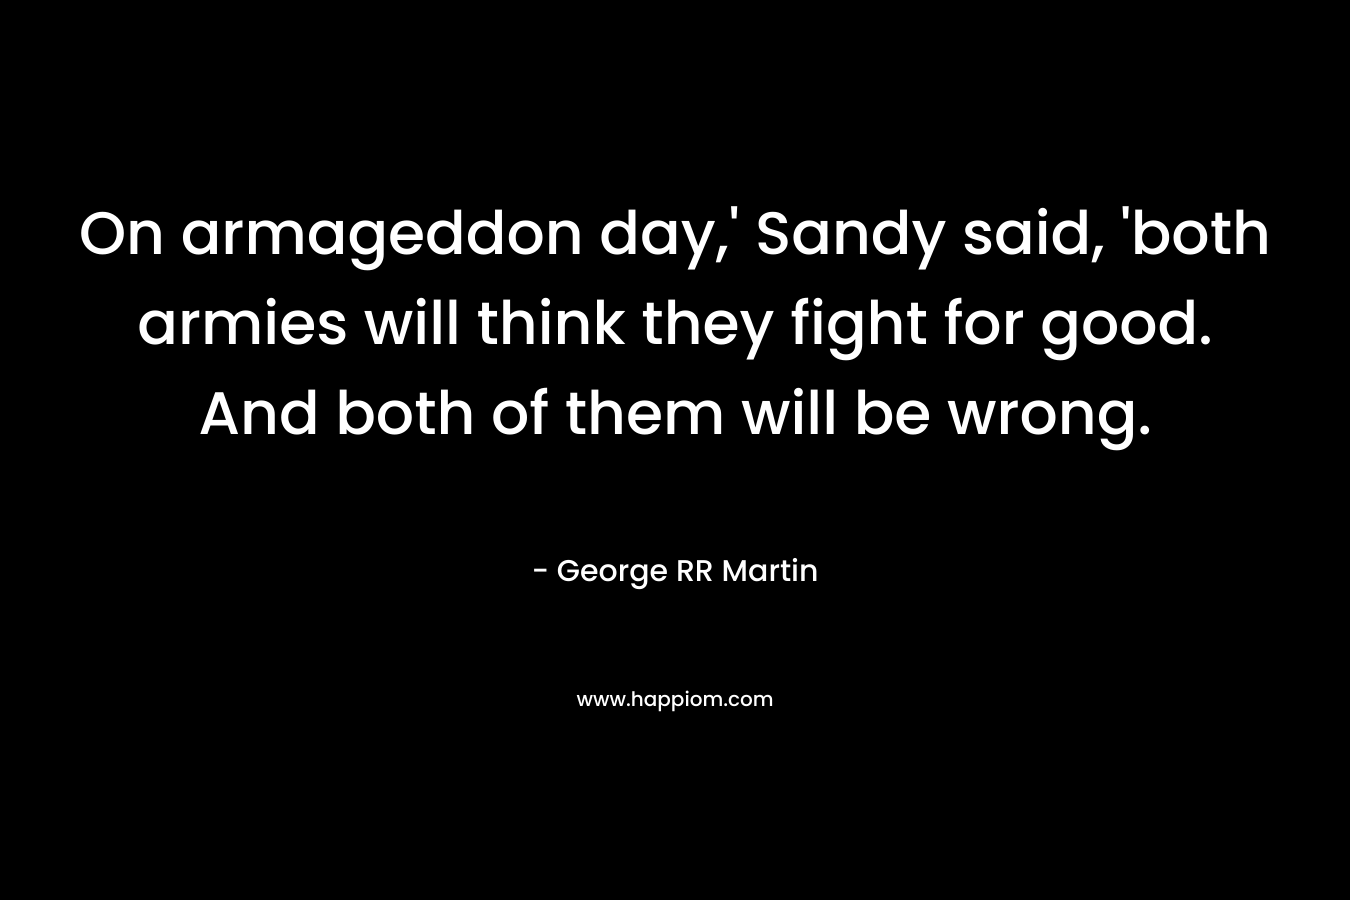 On armageddon day,’ Sandy said, ‘both armies will think they fight for good. And both of them will be wrong. – George RR Martin